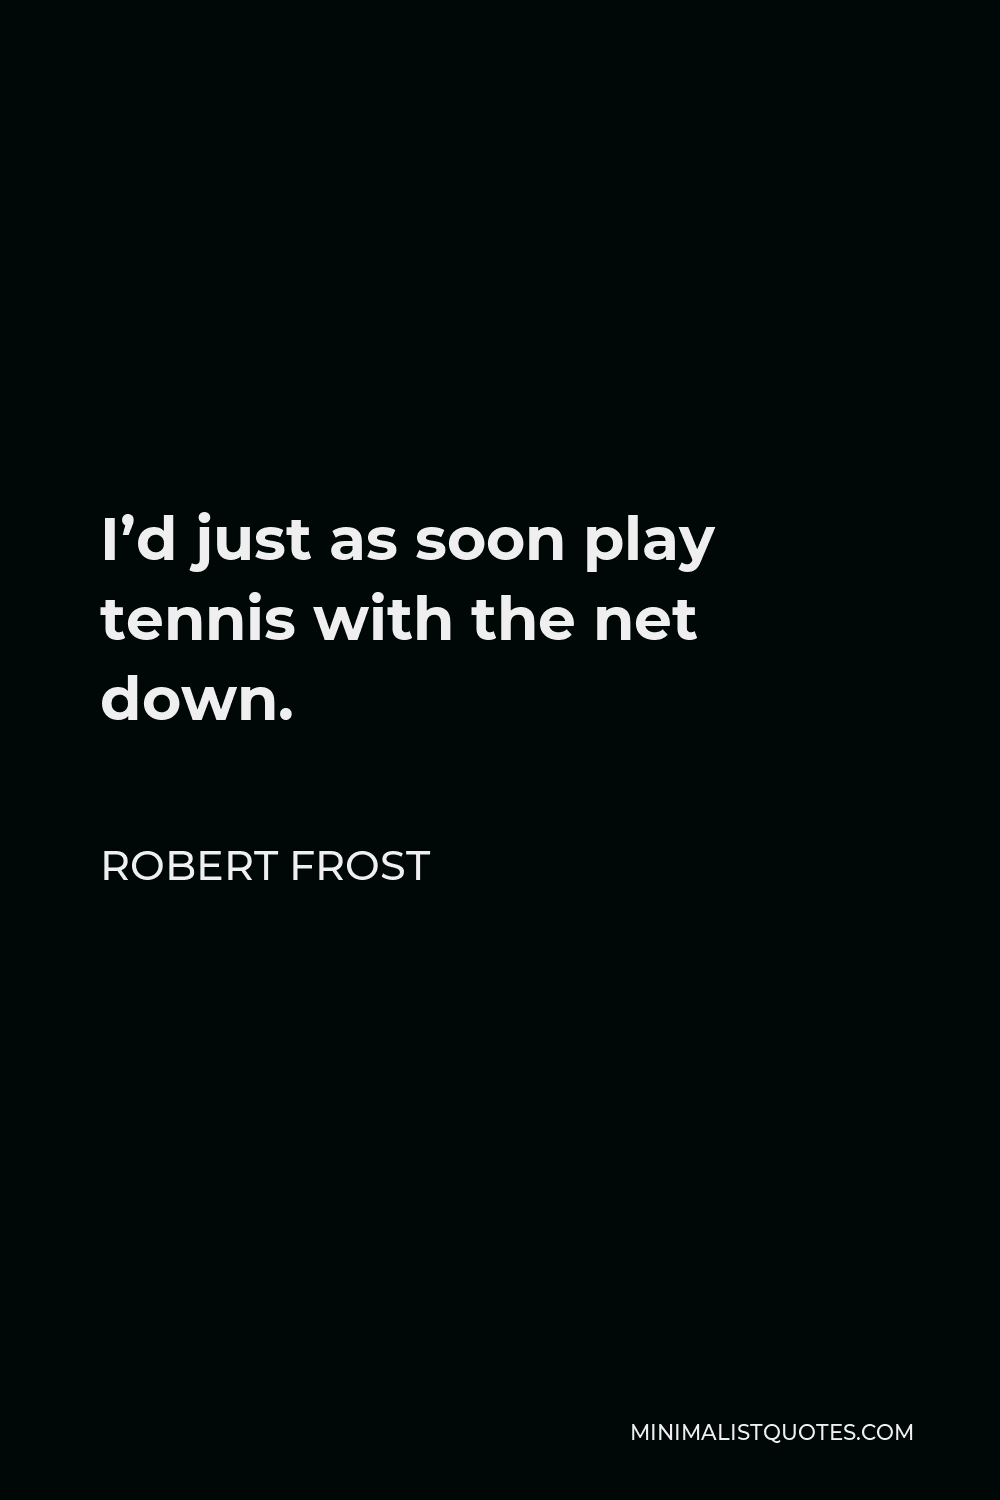 Robert Frost Quote - I’d just as soon play tennis with the net down.